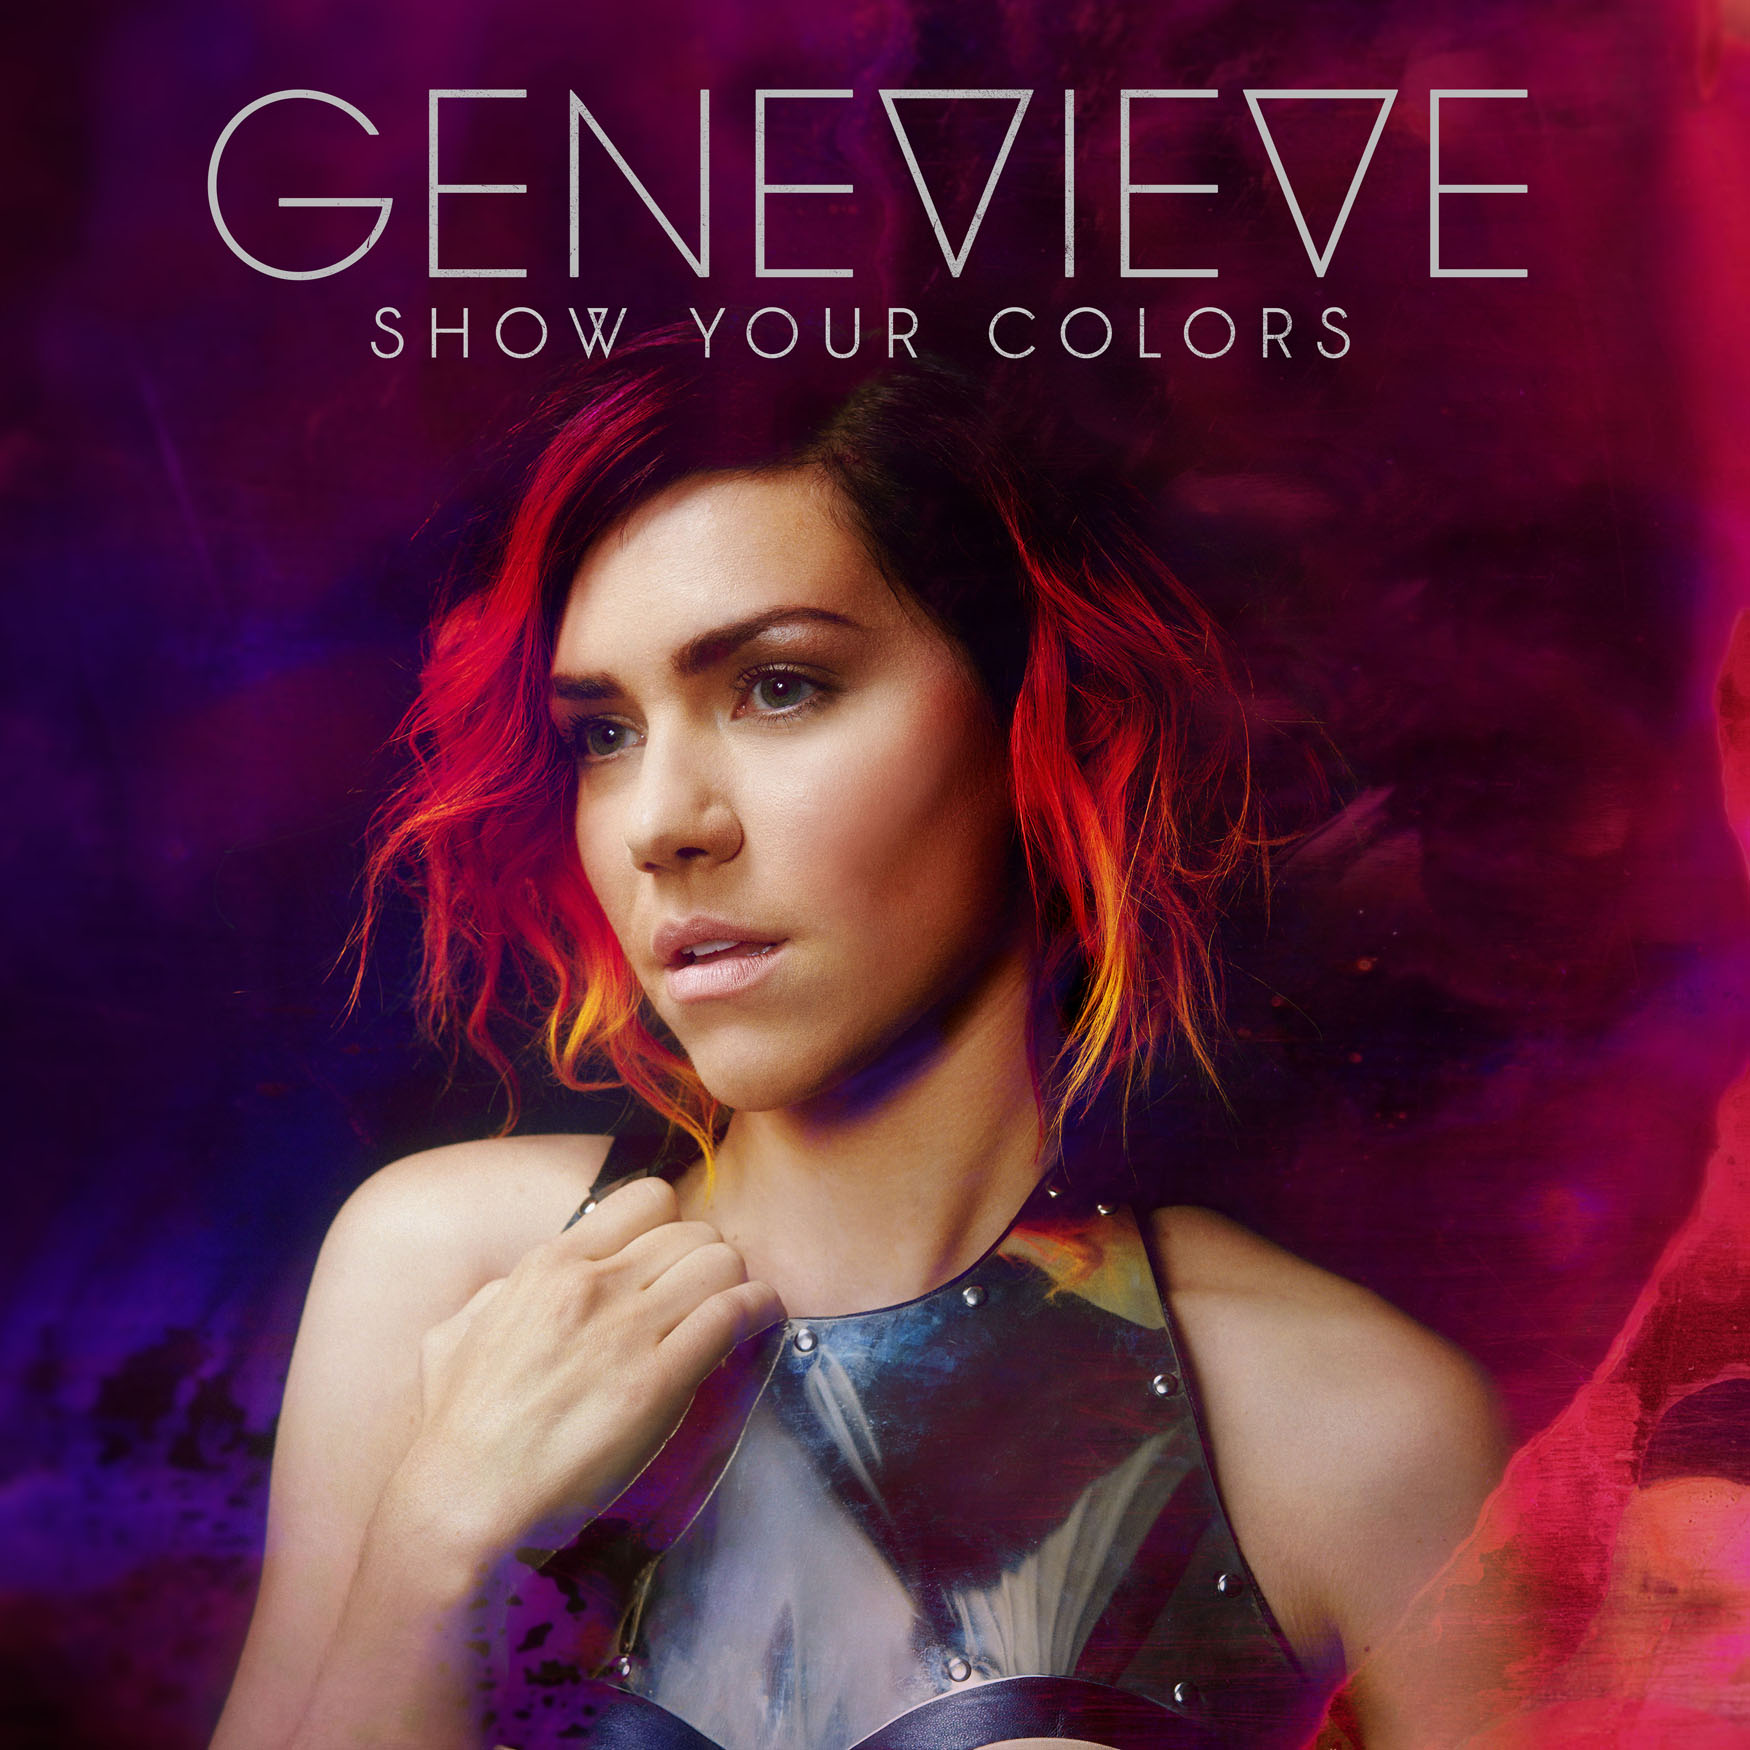 Show Your Colors - Genevieve